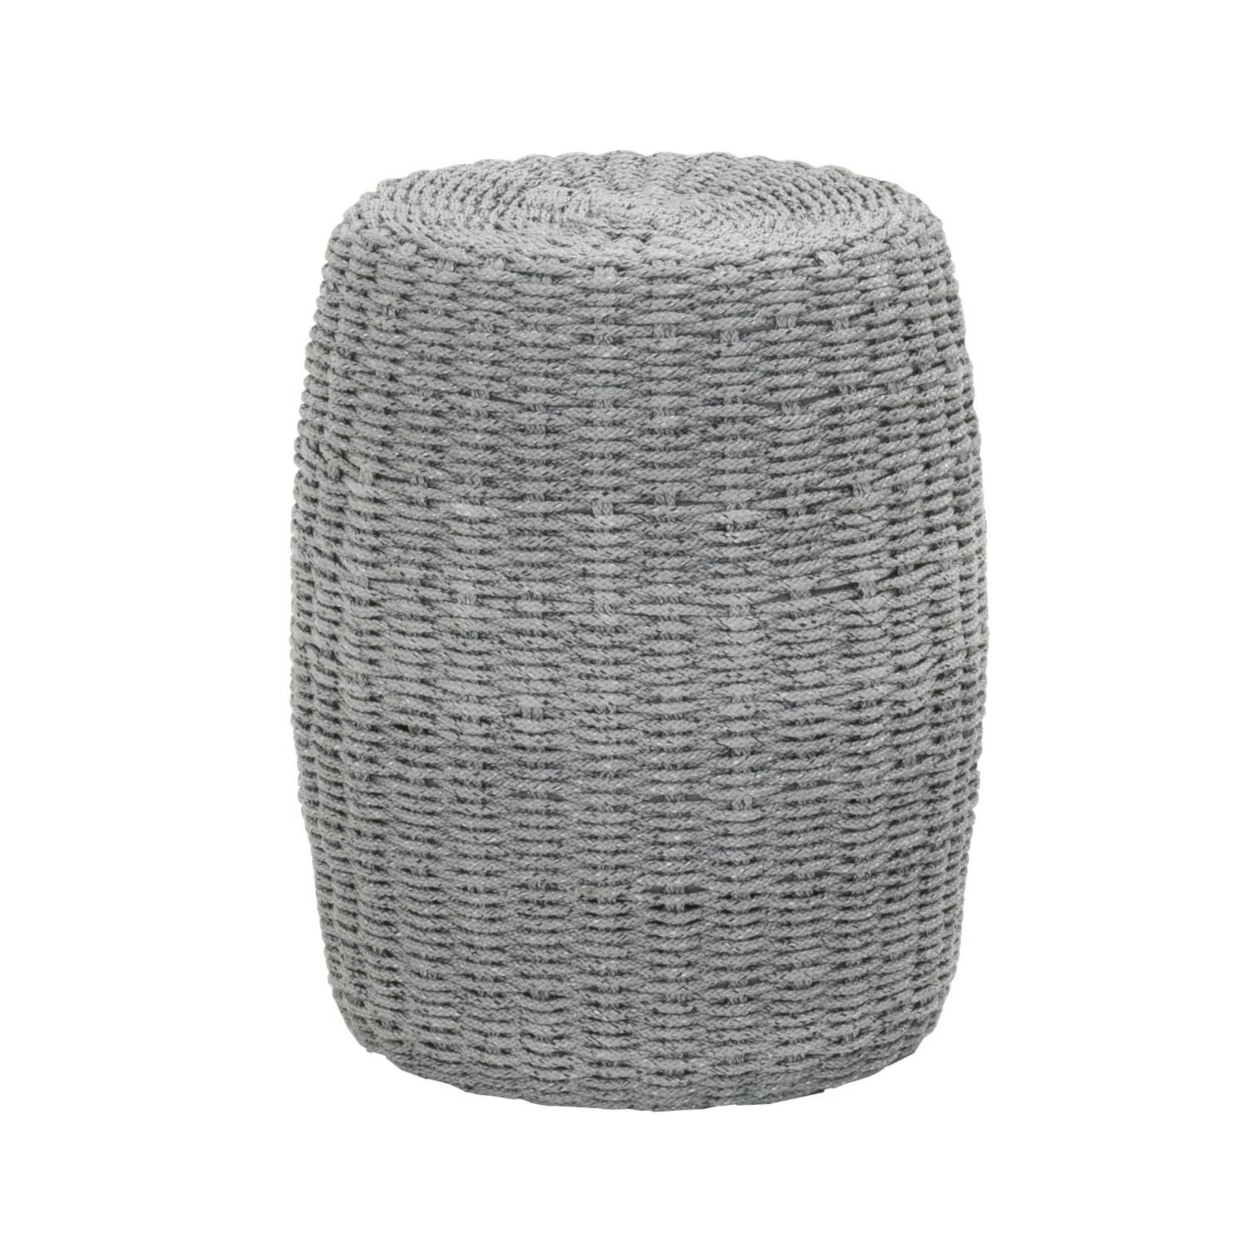 Intricate Rope Weave Design Accent Table, Gray- Saltoro Sherpi